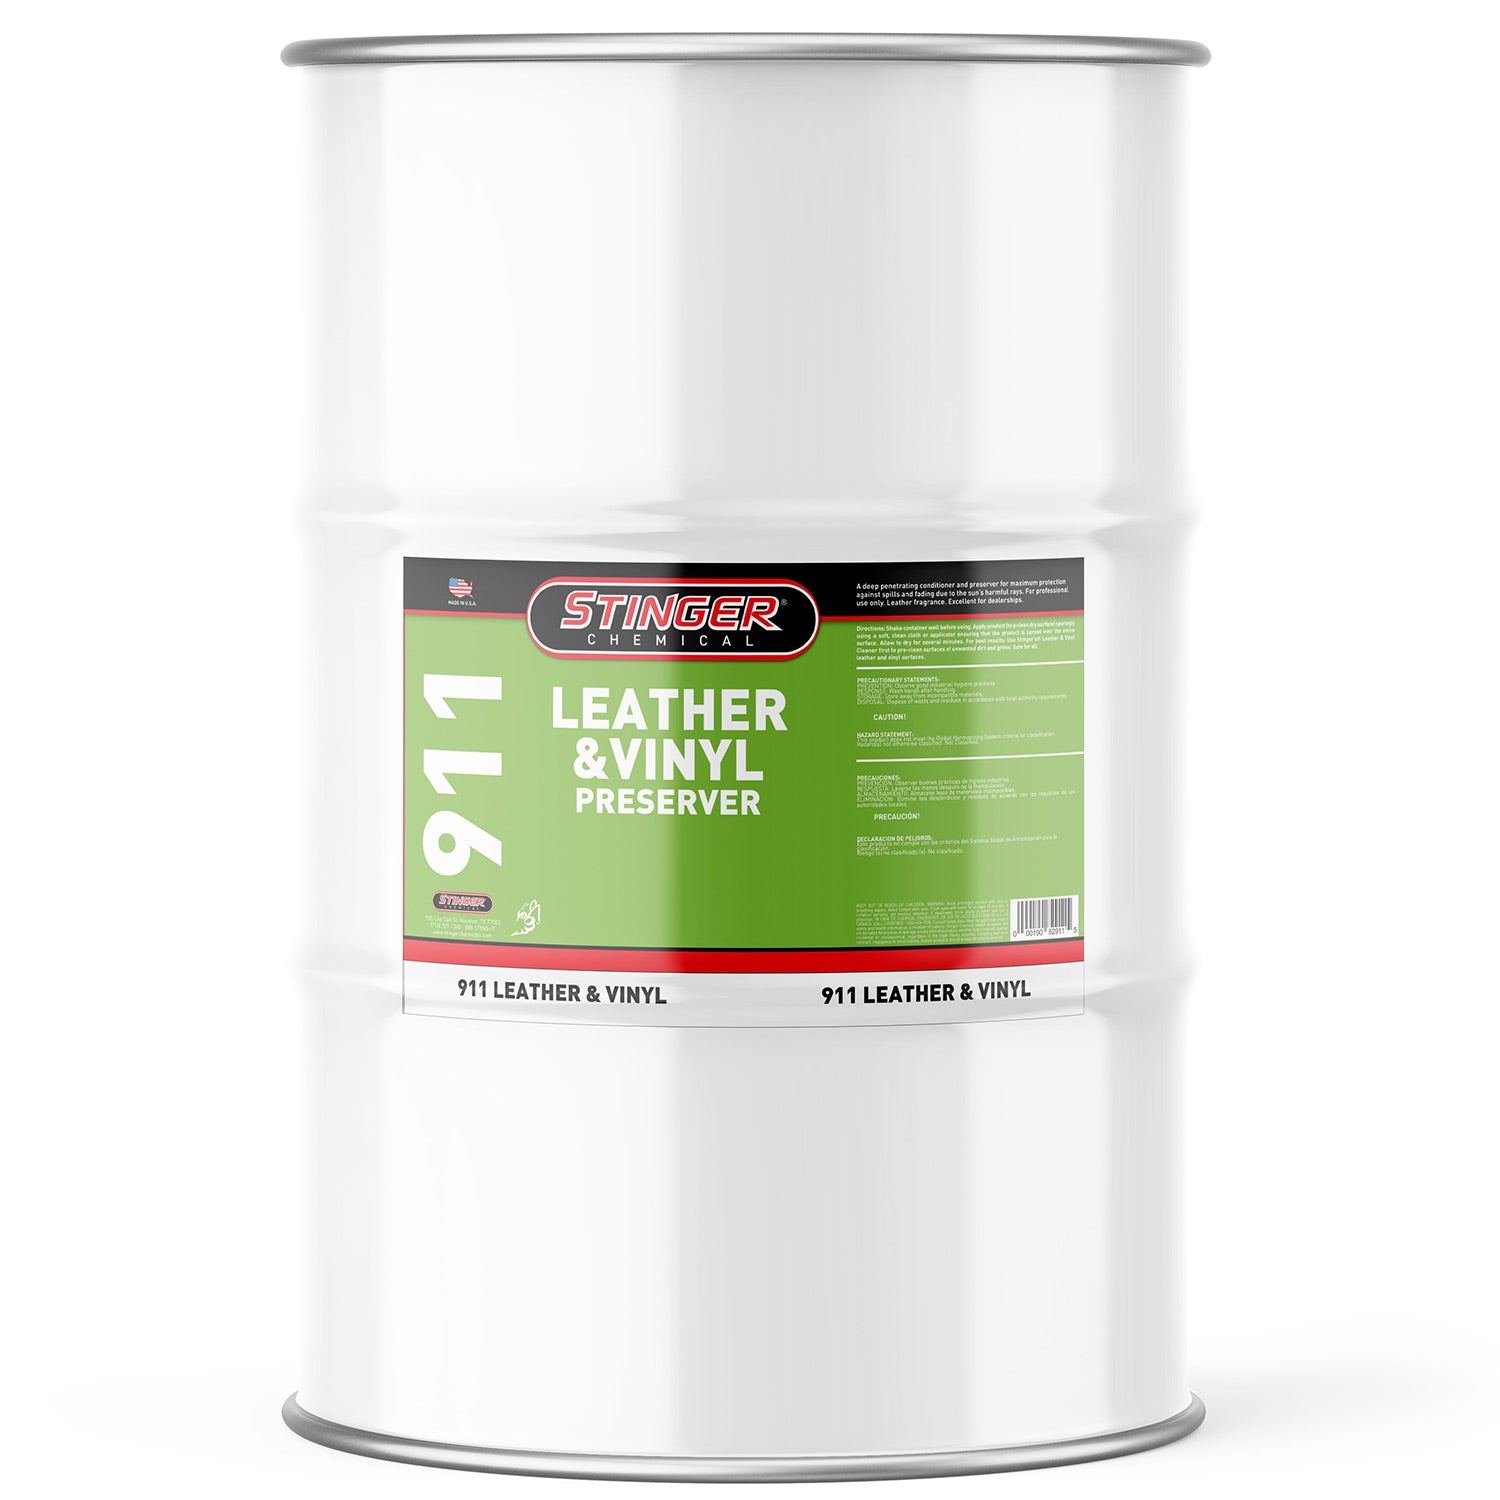 leather-preserver-creme-in-a-single-plastic-55-gallon-drum-container-with-lid